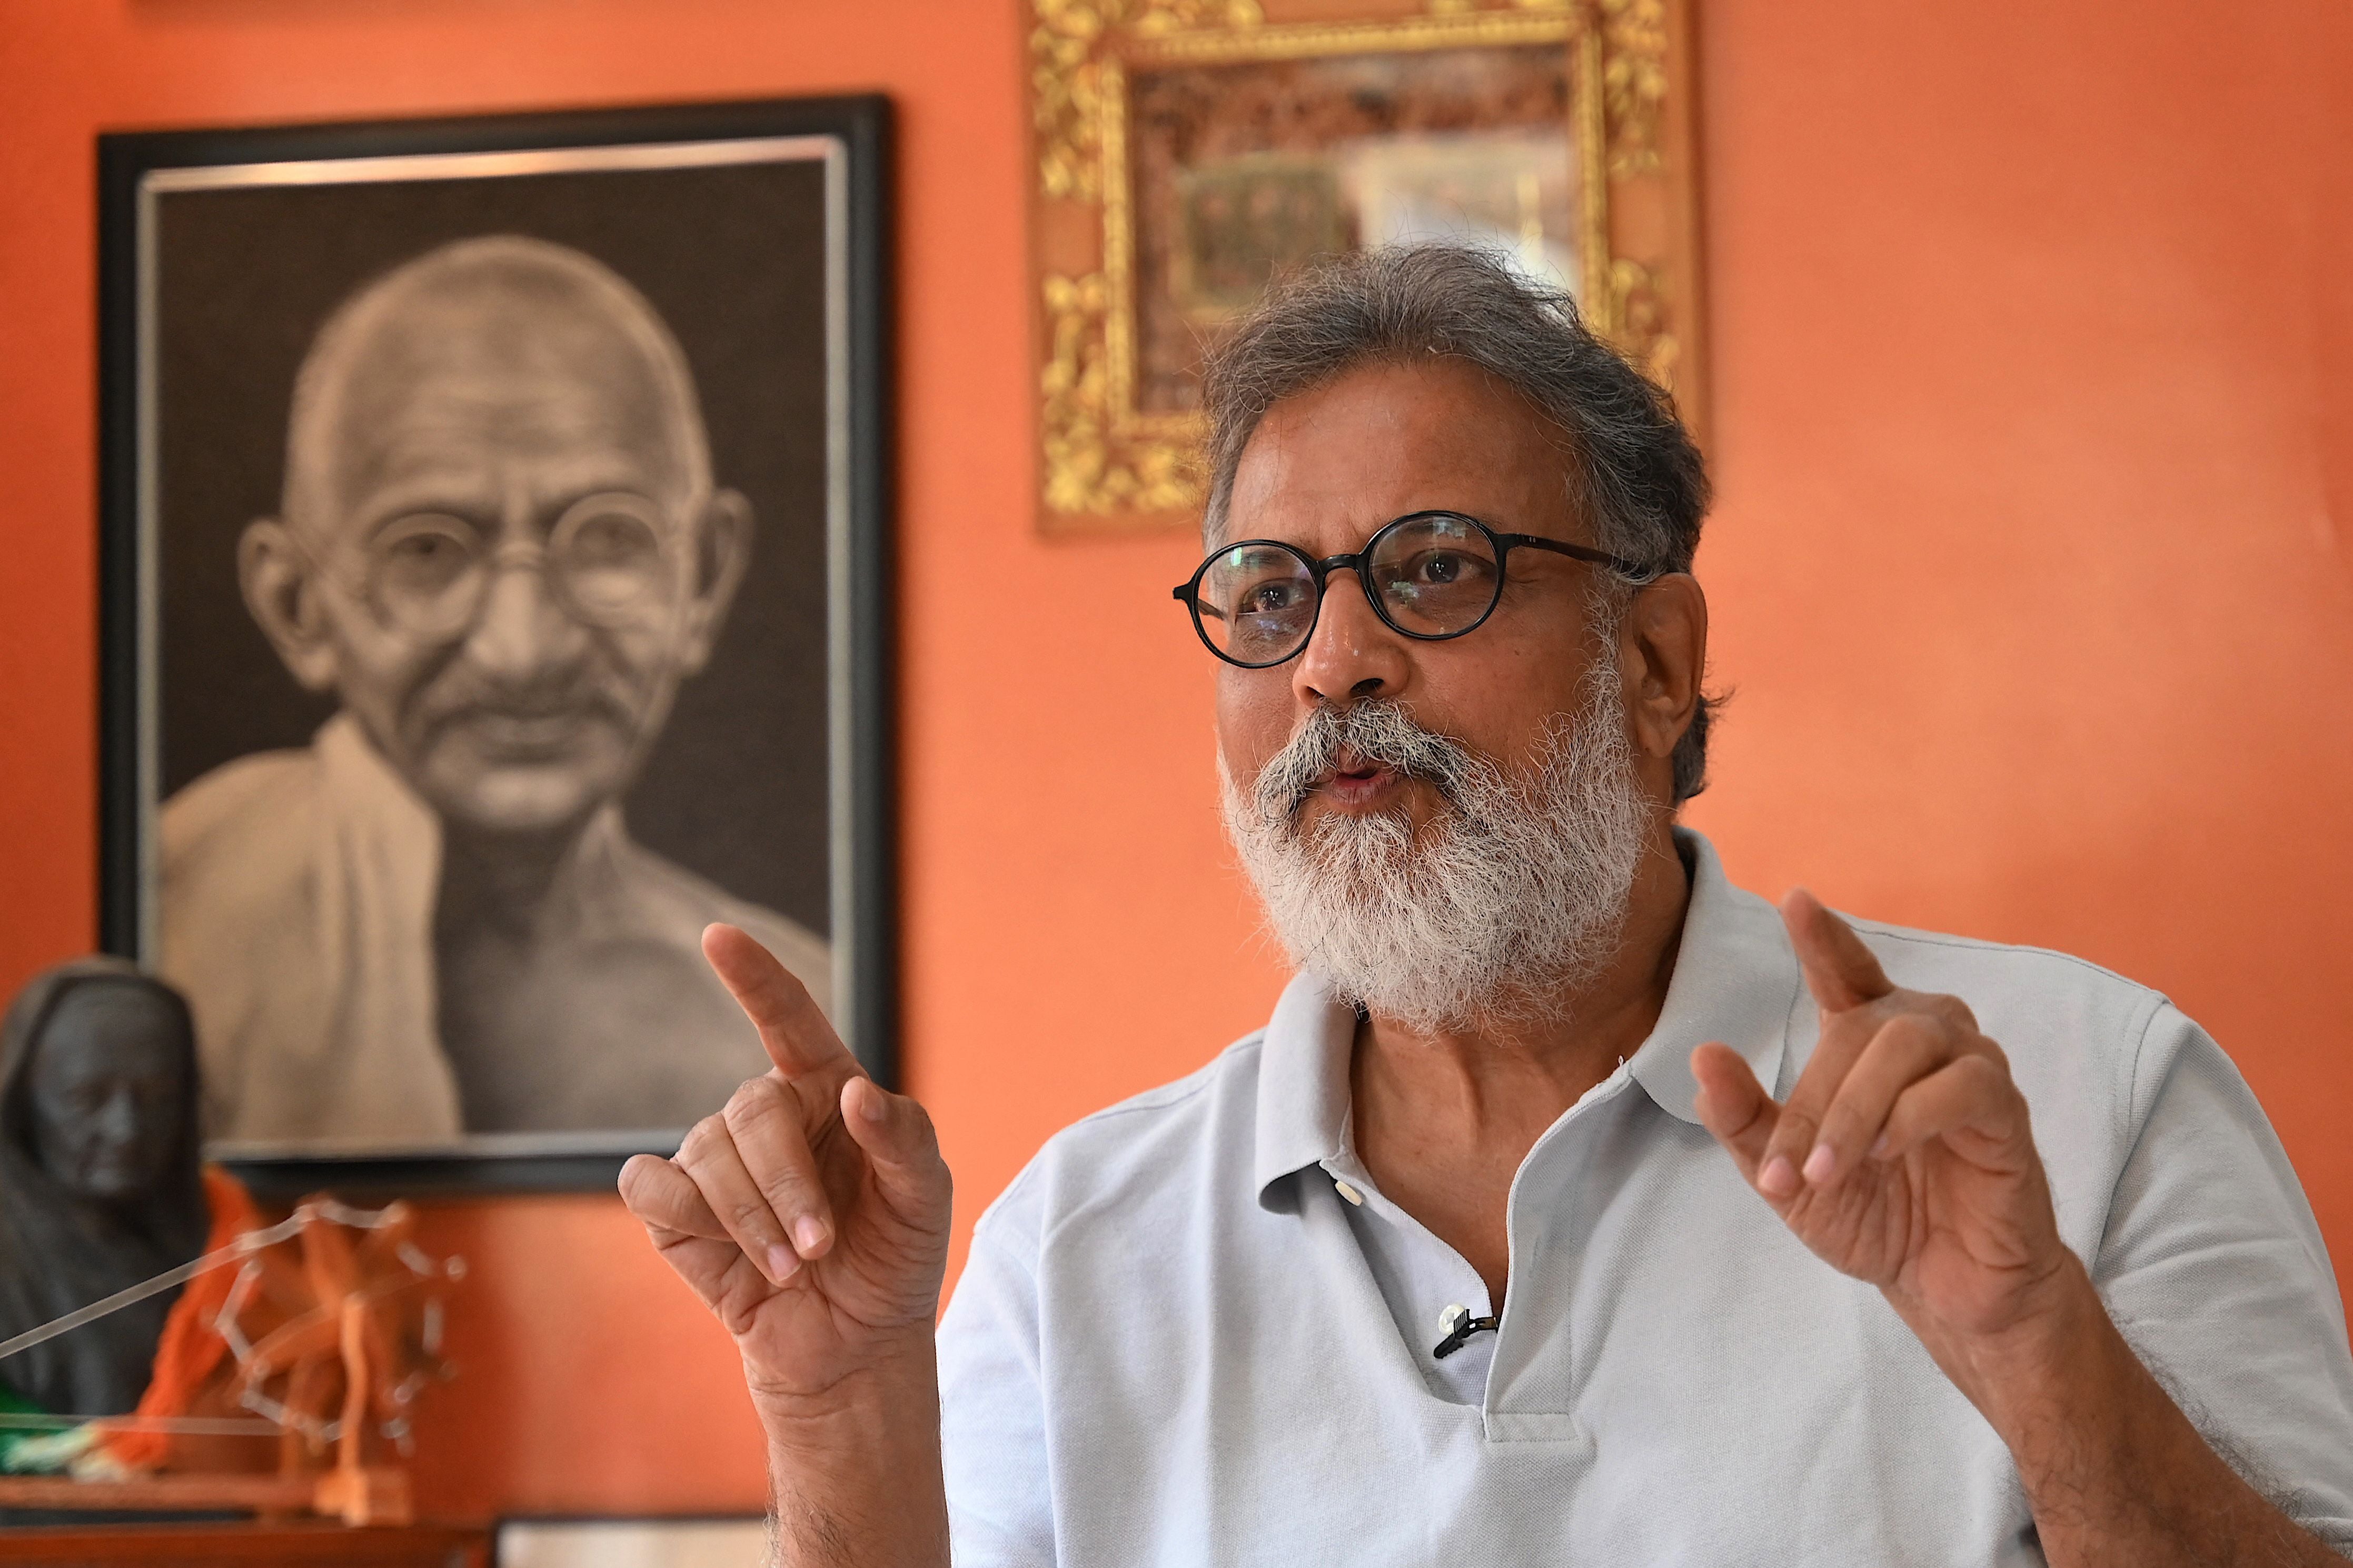 Indian author Tushar Gandhi, who is the great-grandson of Mahatma Gandhi, speaks during an interview at his home in Mumbai